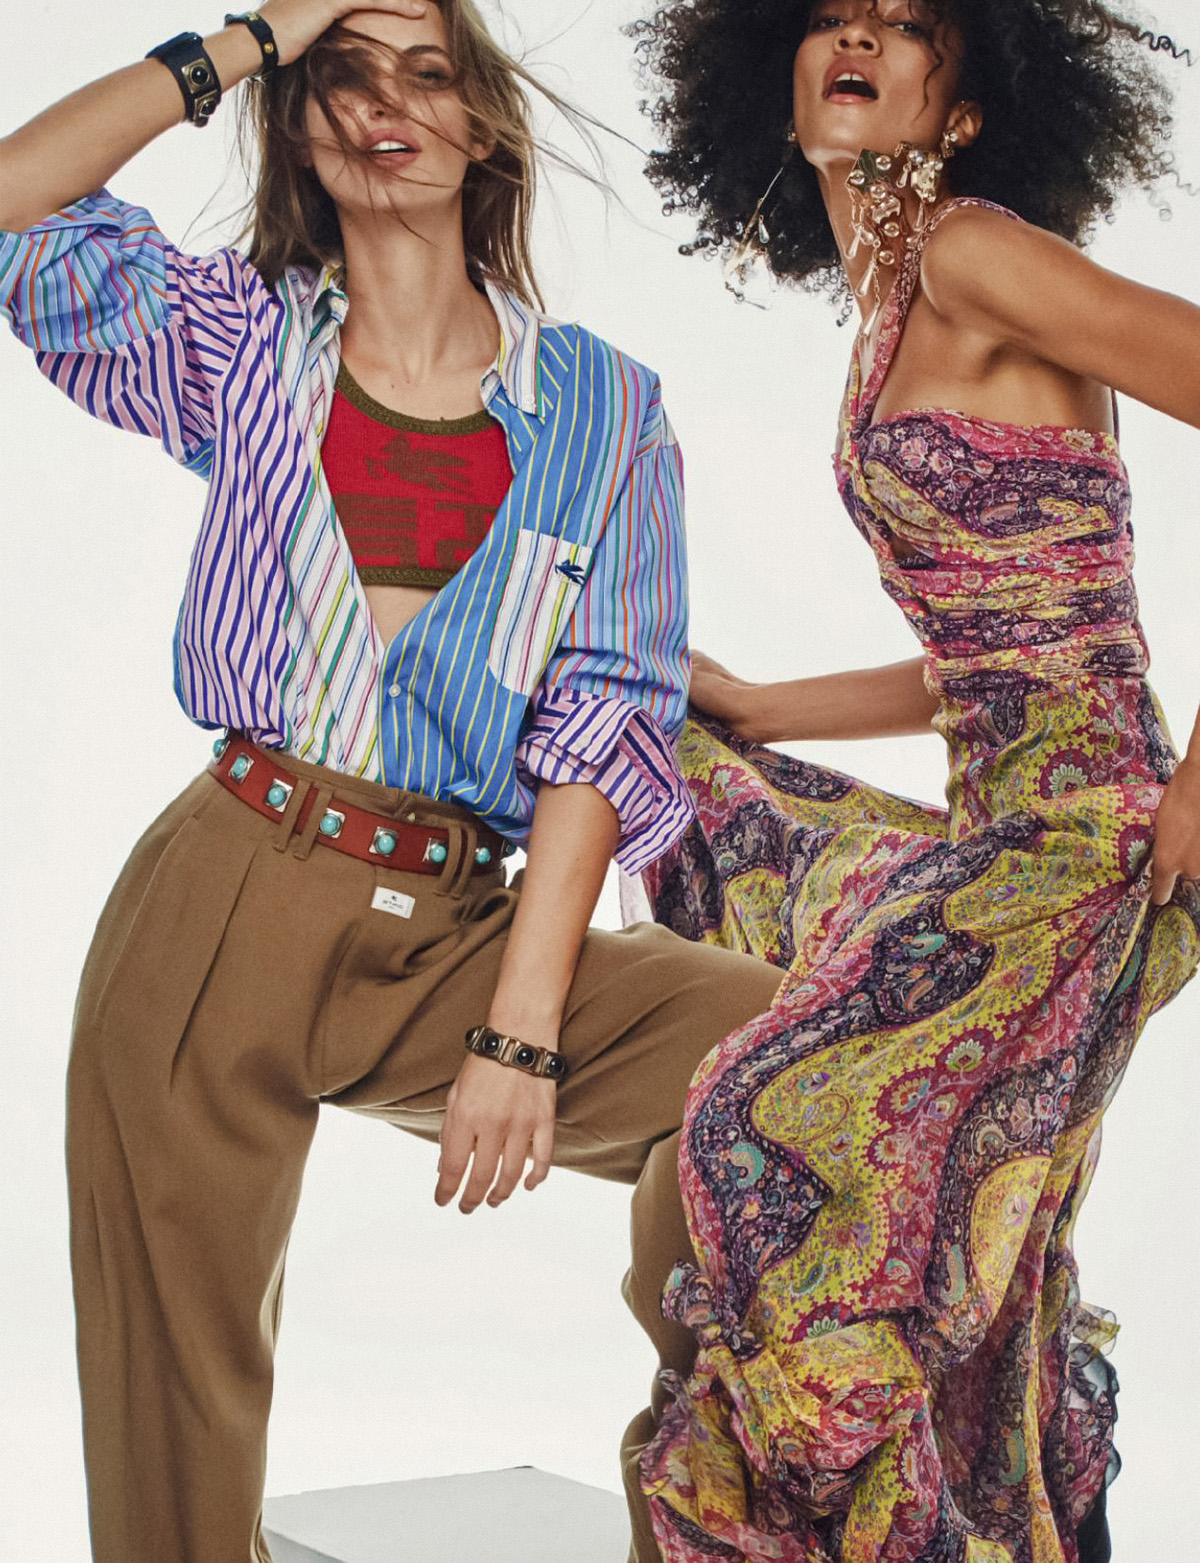 Lauren Auerbach and Sany Liriano by Mario Sierra for Elle Spain February 2022